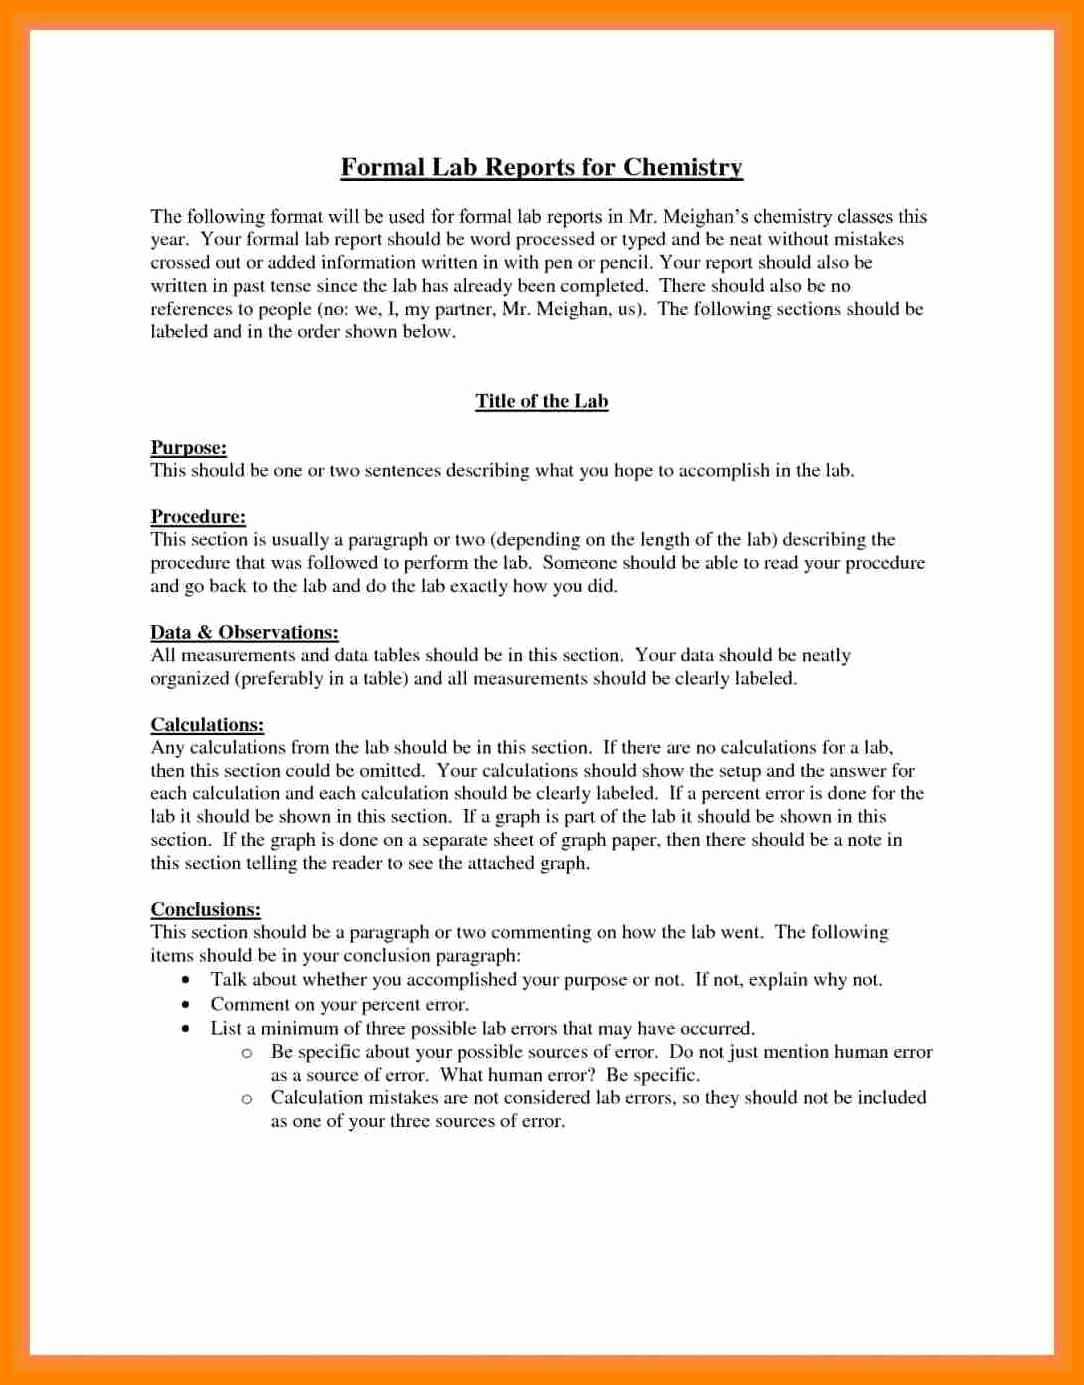 003 Formal Lab Report Example Best Write Up Template Of Intended For Chemistry Lab Report Template